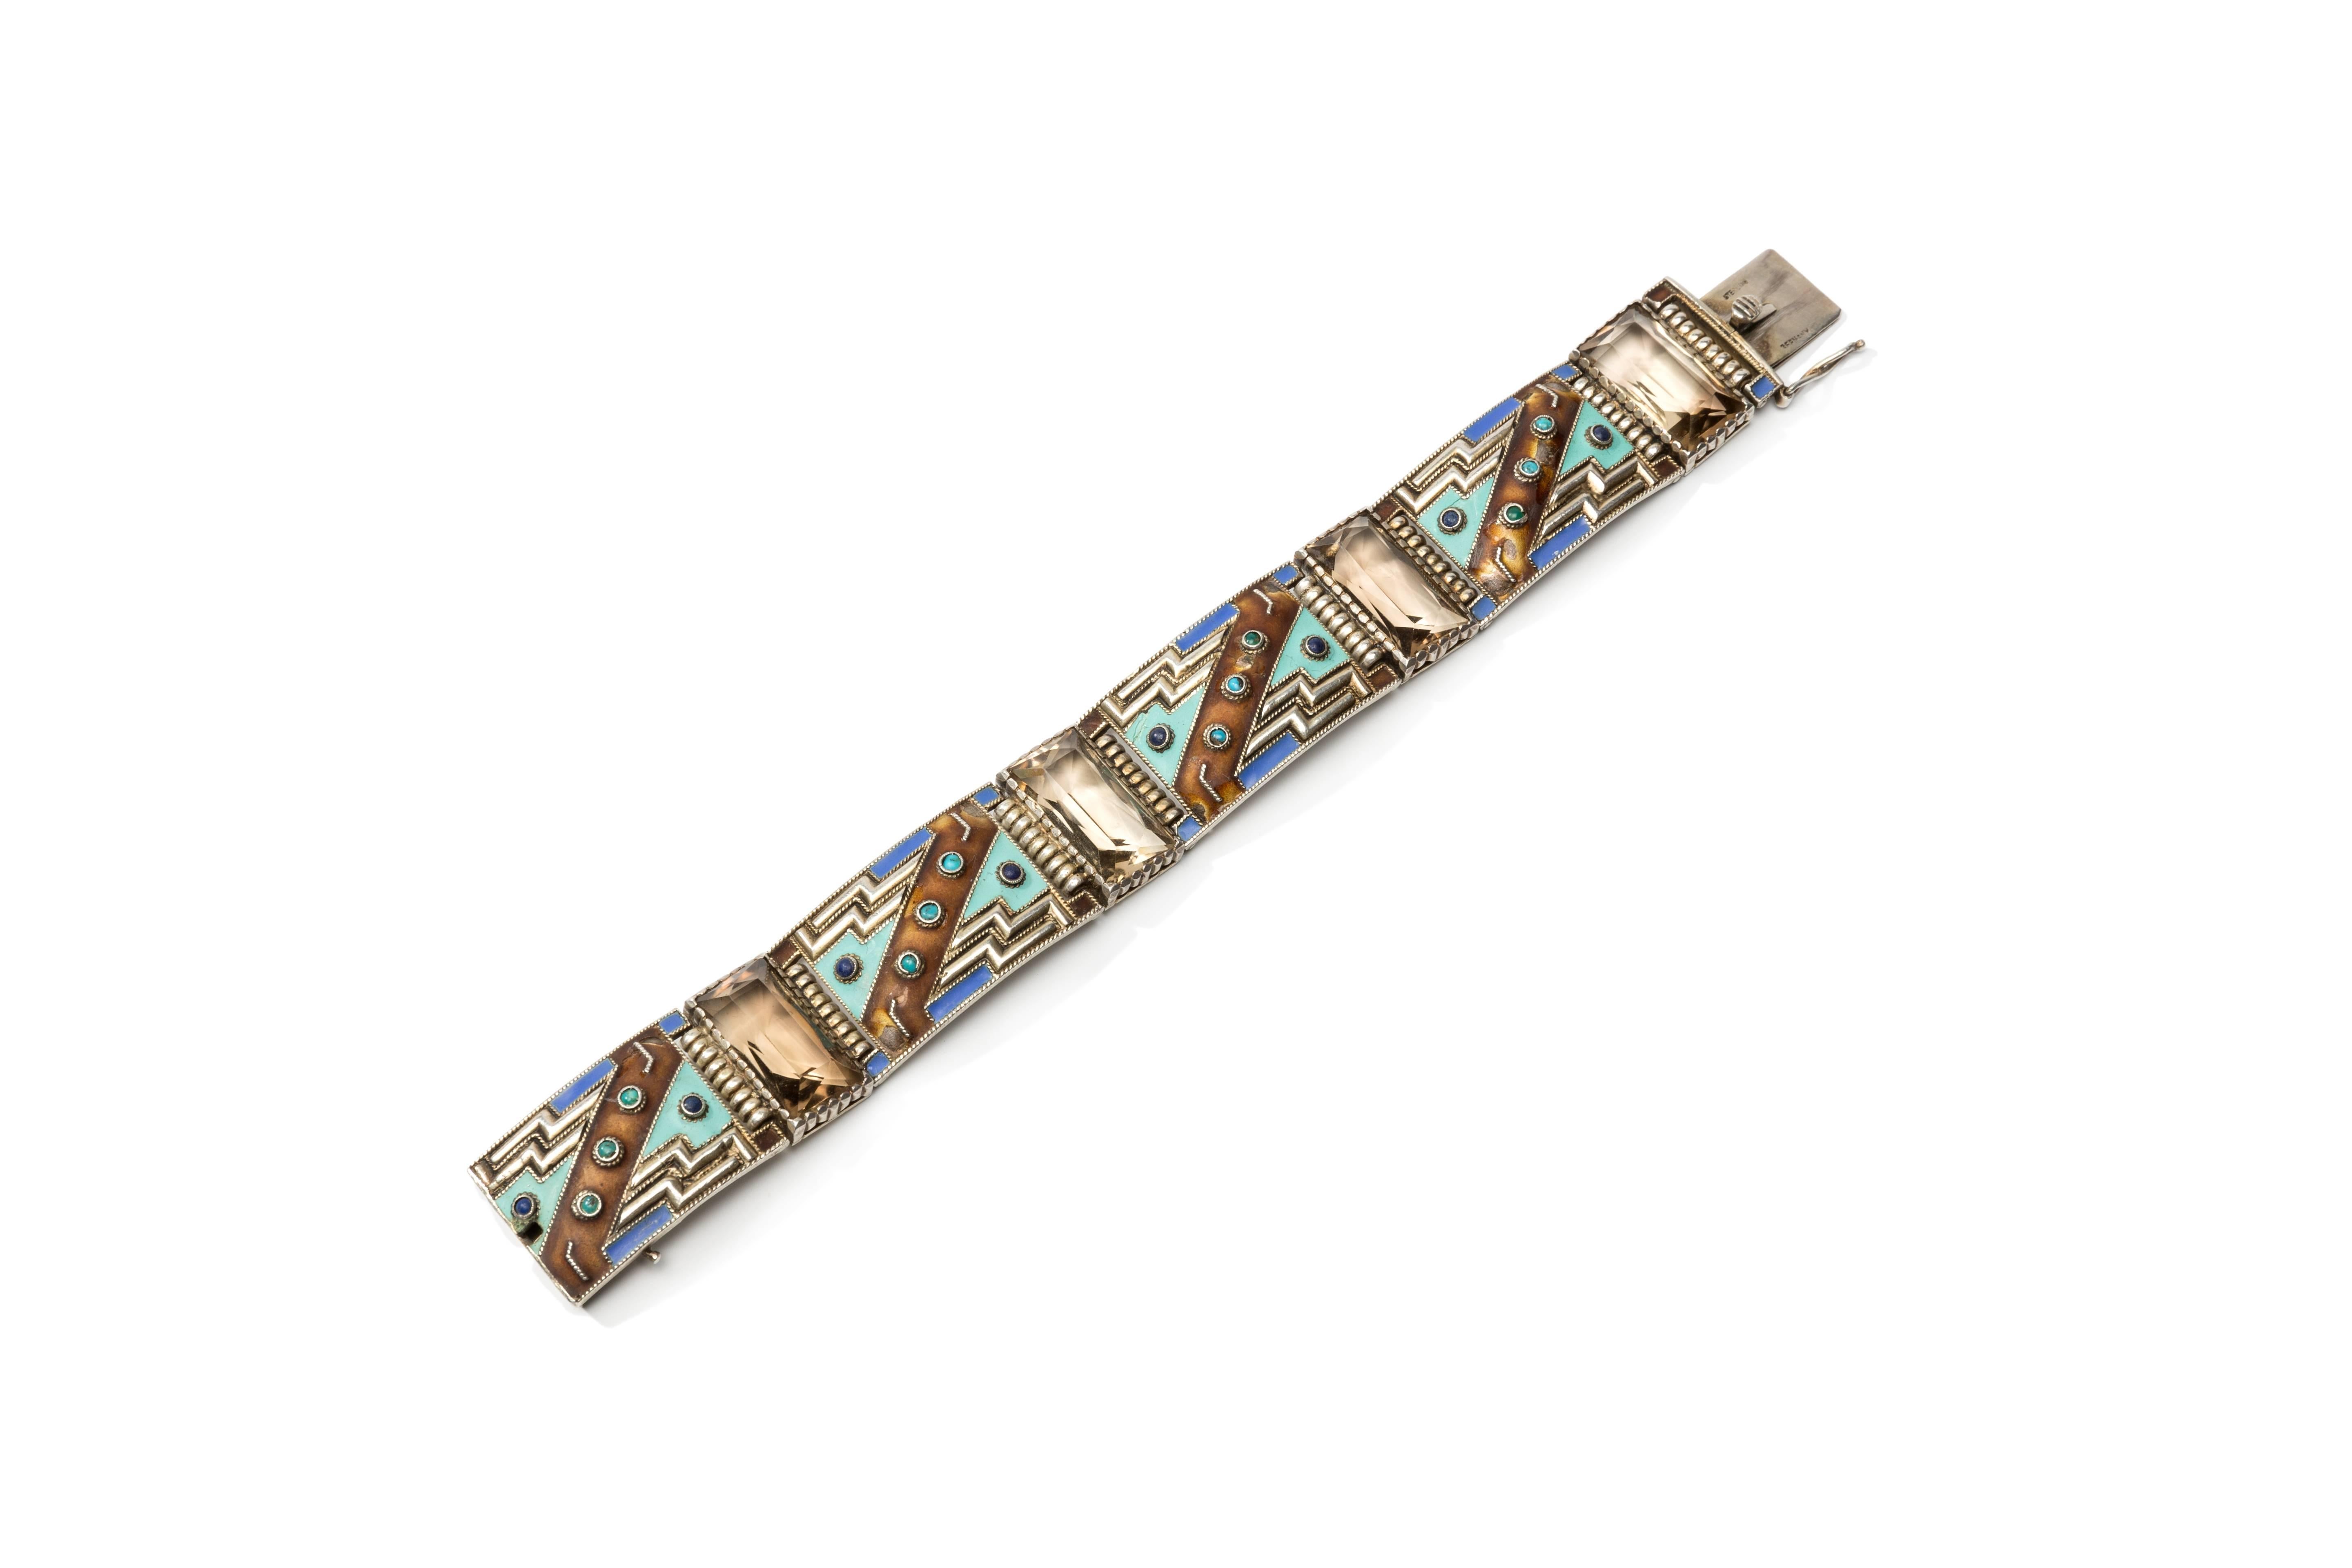 Designed and made by Theodor Fahrer, Germany 1928. 4 enamel panels decorated with 4 smoky topaz, 8 lapis lazuli and 12 Turquoise. Gilded silver. On the clasp marked: STERLING, GERMANY. Total weight: 57,17 g. Length: 7.17 in ( 18,2 cm ). Width: 0.83